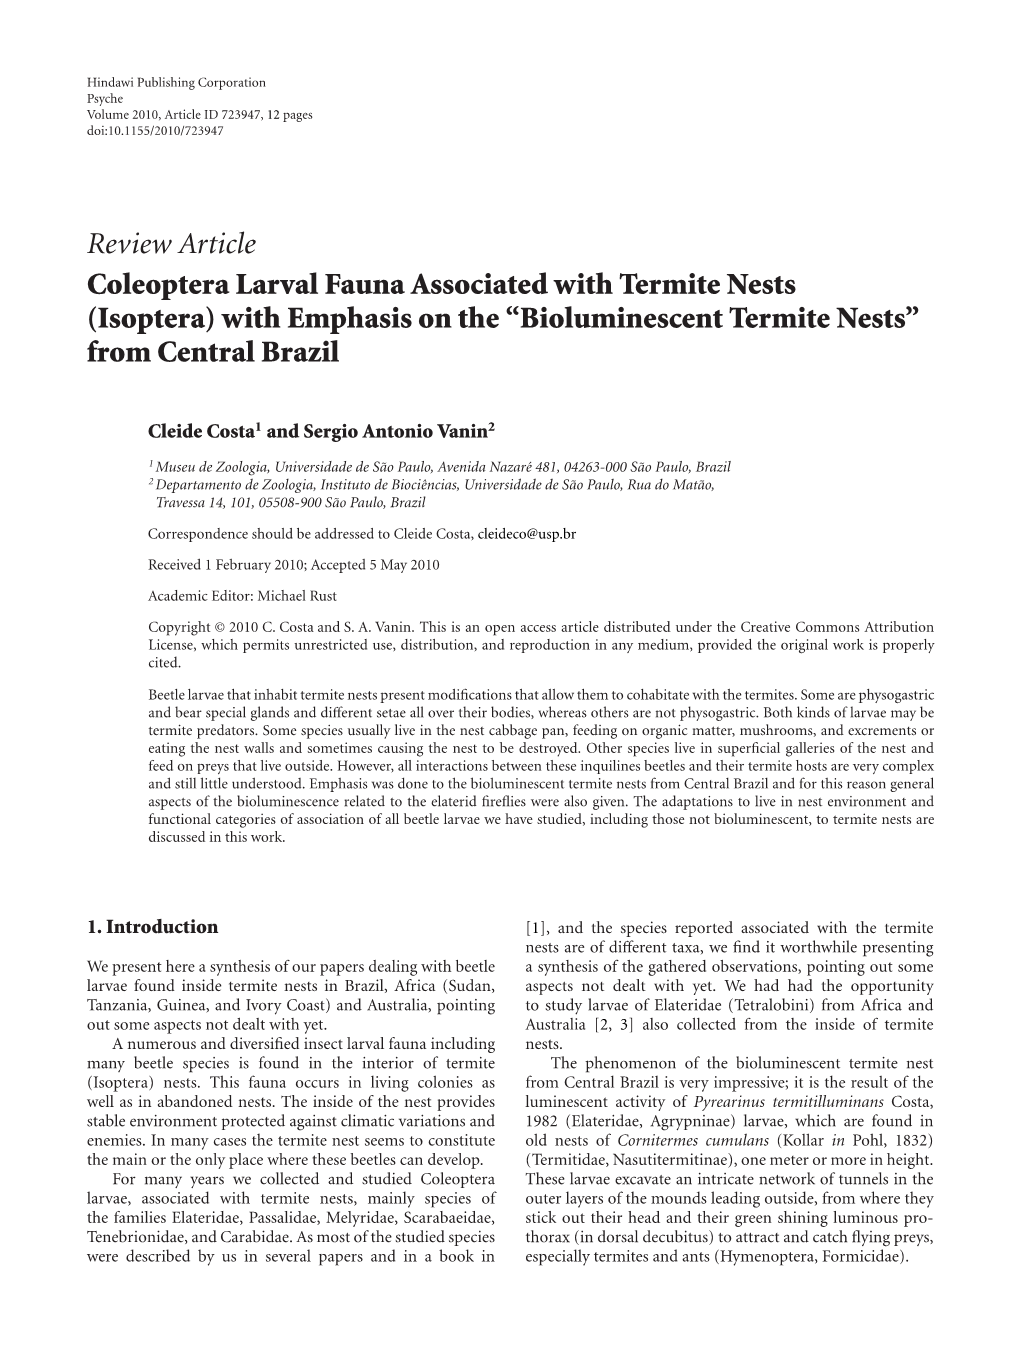 Coleoptera Larval Fauna Associated with Termite Nests (Isoptera) with Emphasis on the “Bioluminescent Termite Nests” from Central Brazil